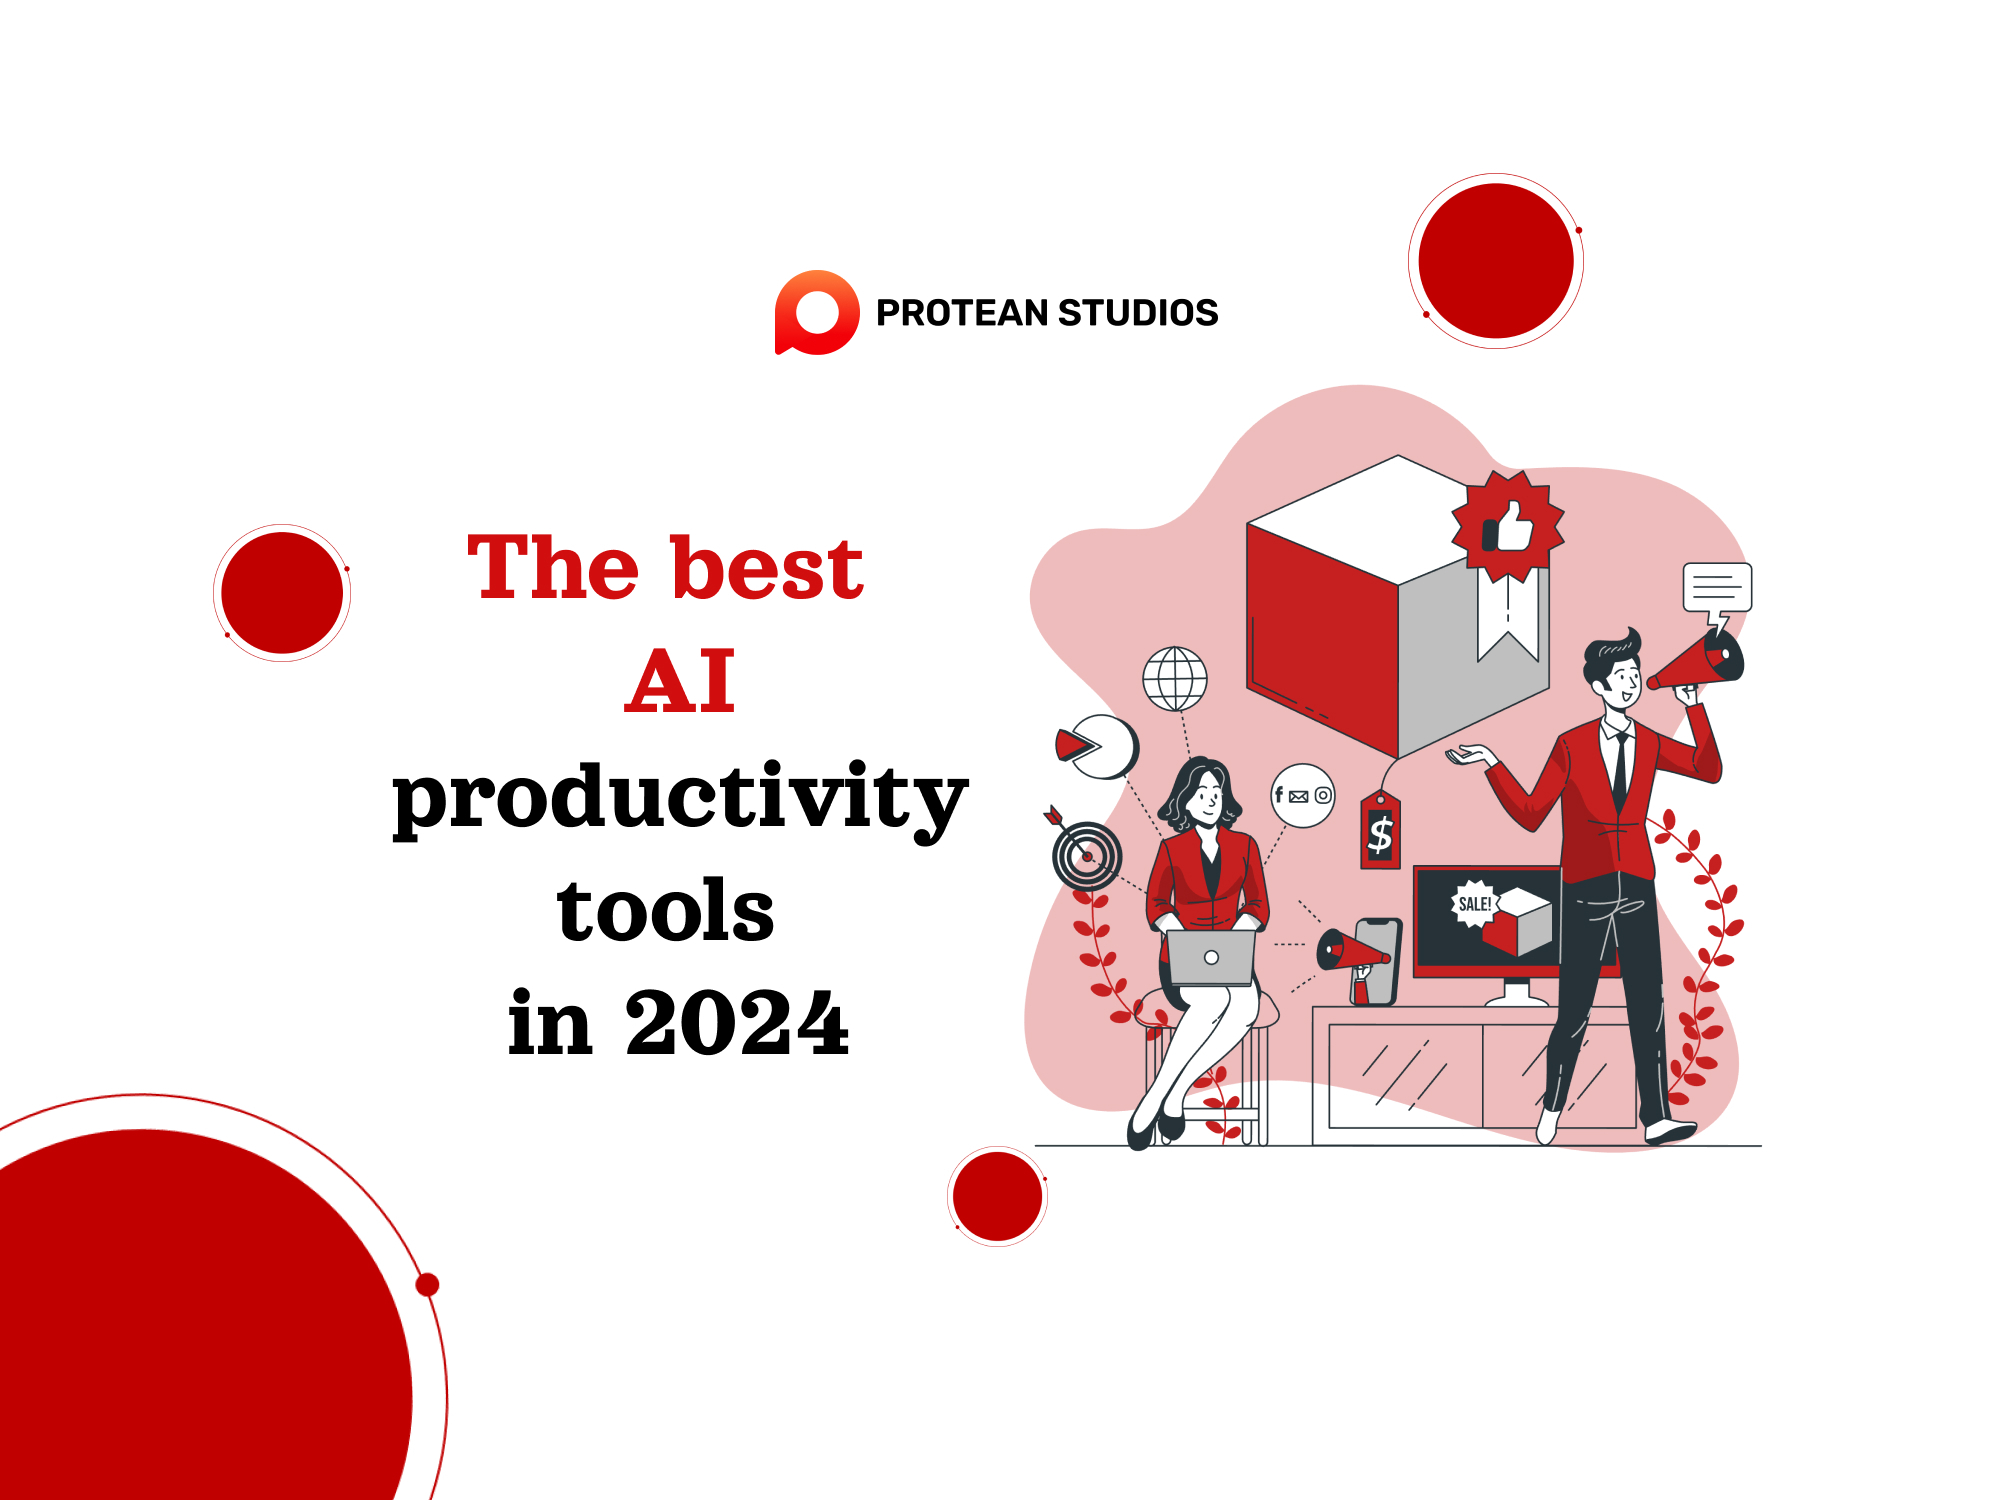 The best AI productivity tools in 2024